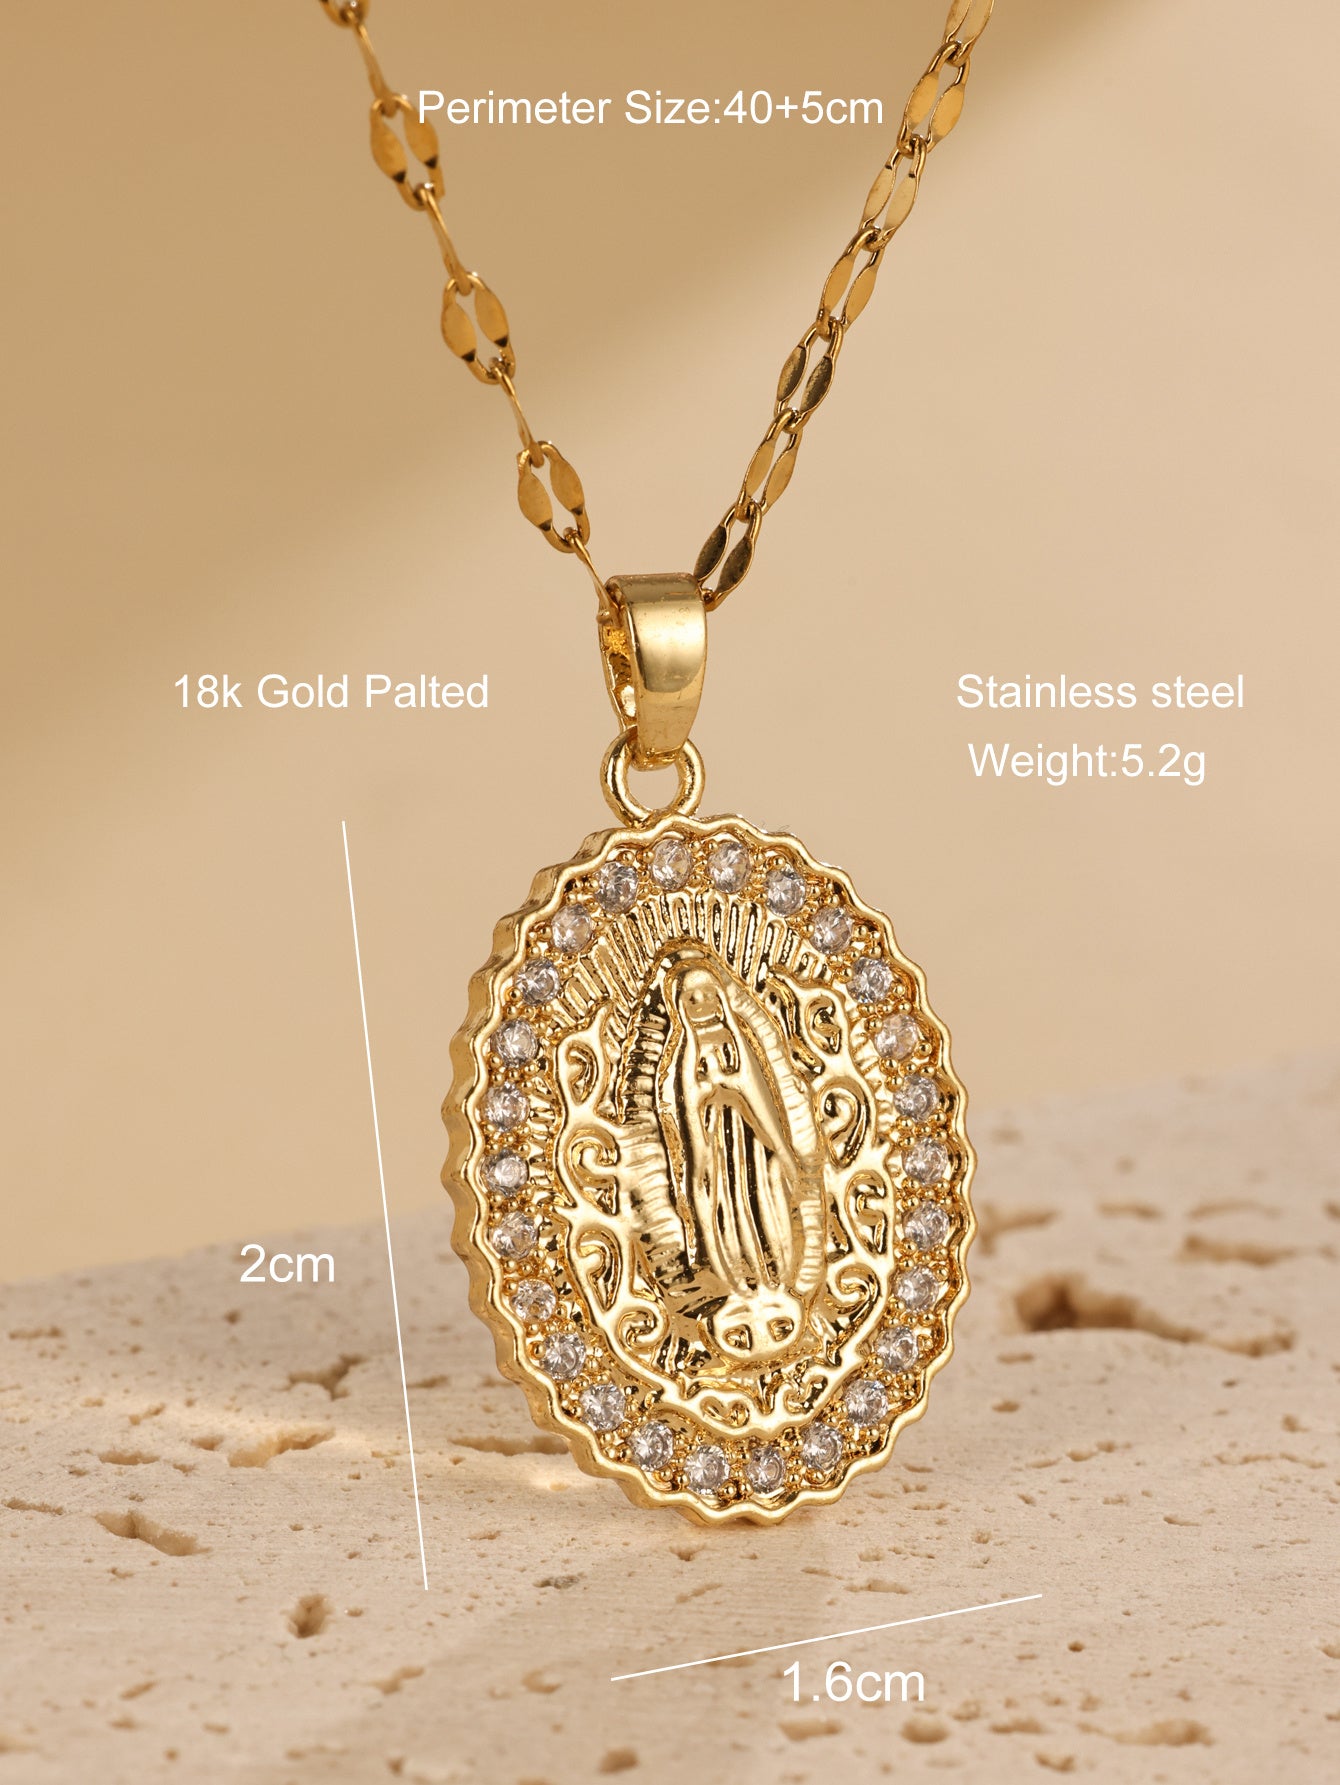 The European And American Oval Shaped Virgin Mary Pendant Necklace Exudes A Light Luxury And Niche Design Sense